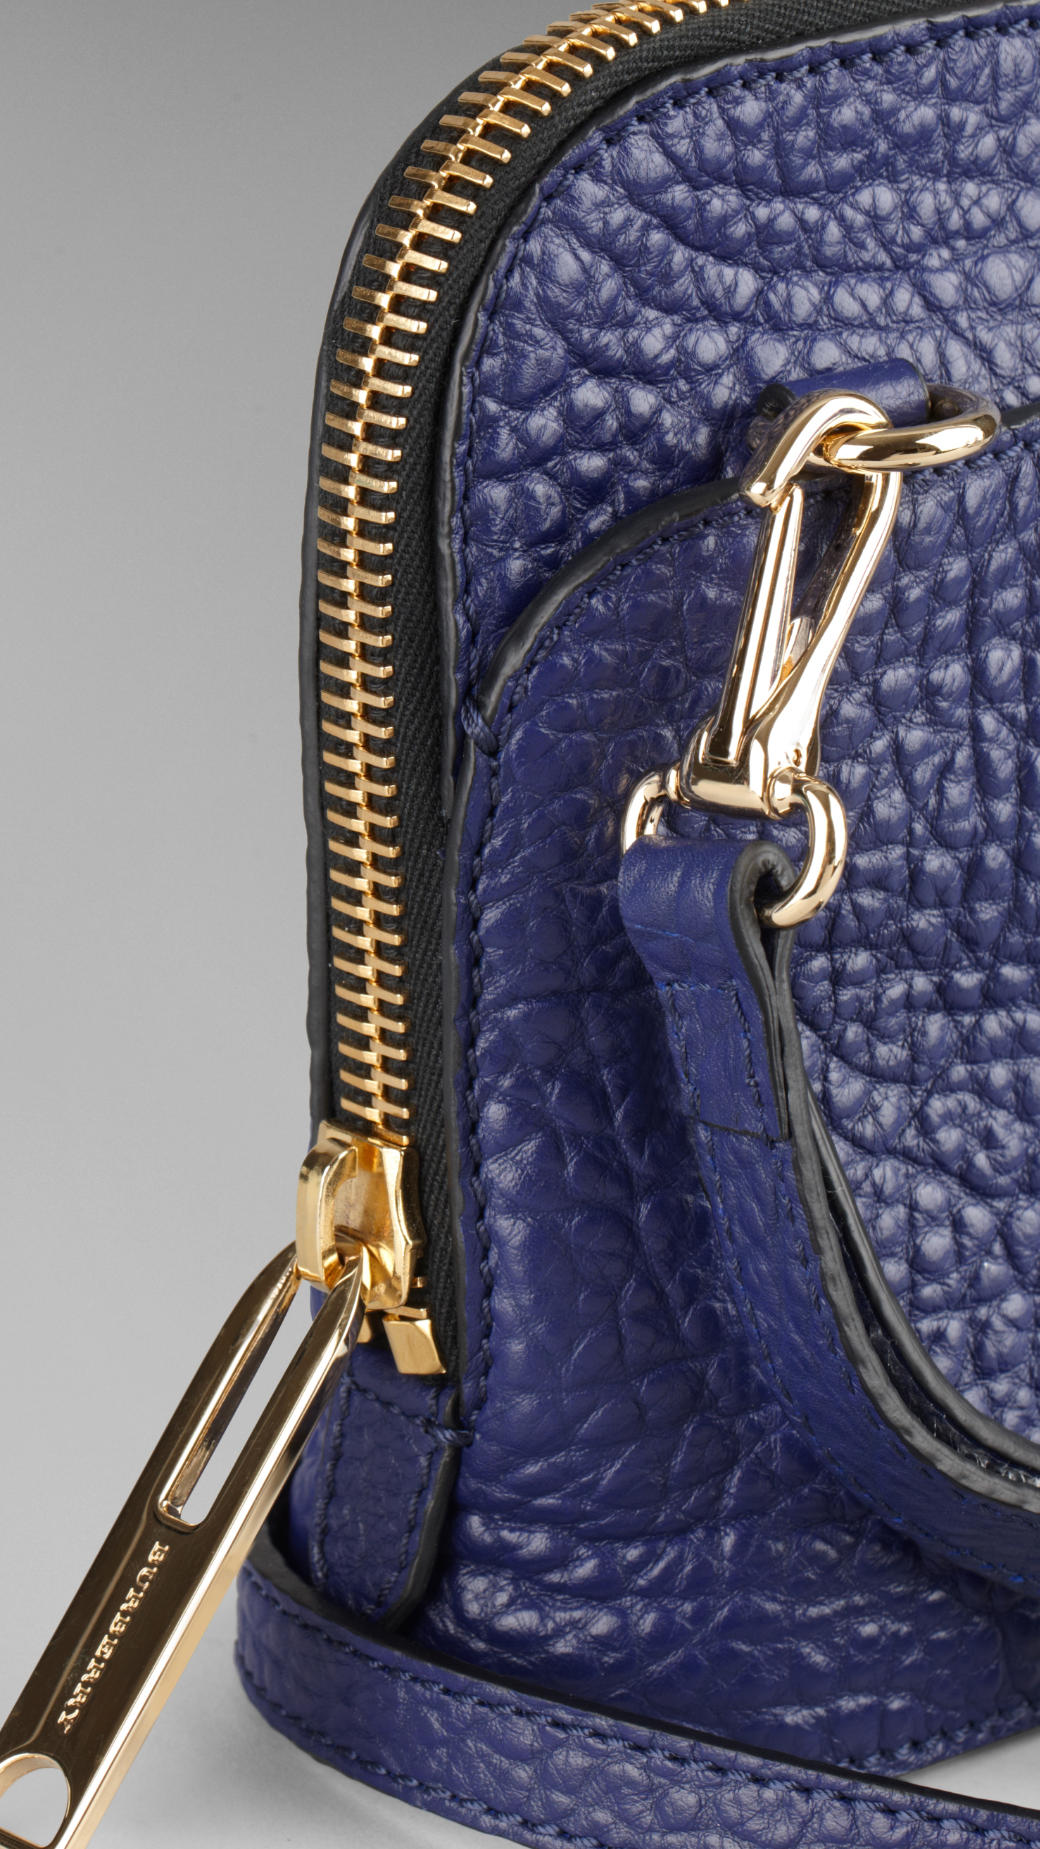 Burberry Small Heritage Grain Leather Crossbody Bag in Blue - Lyst